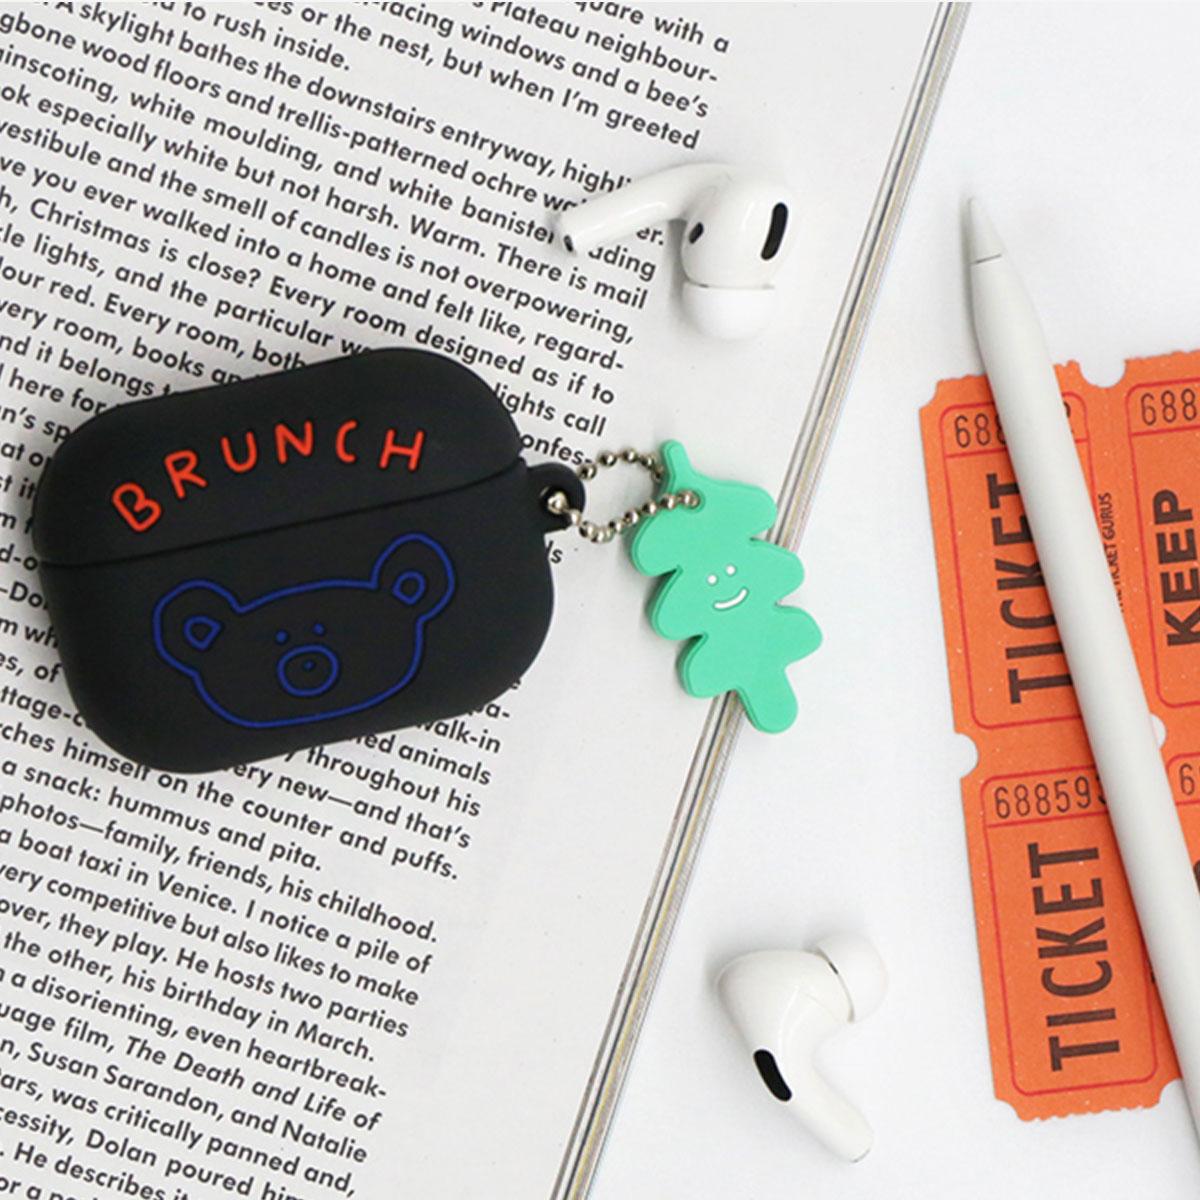 Brunch Brother AirPods Pro 矽膠保護套（黑色）